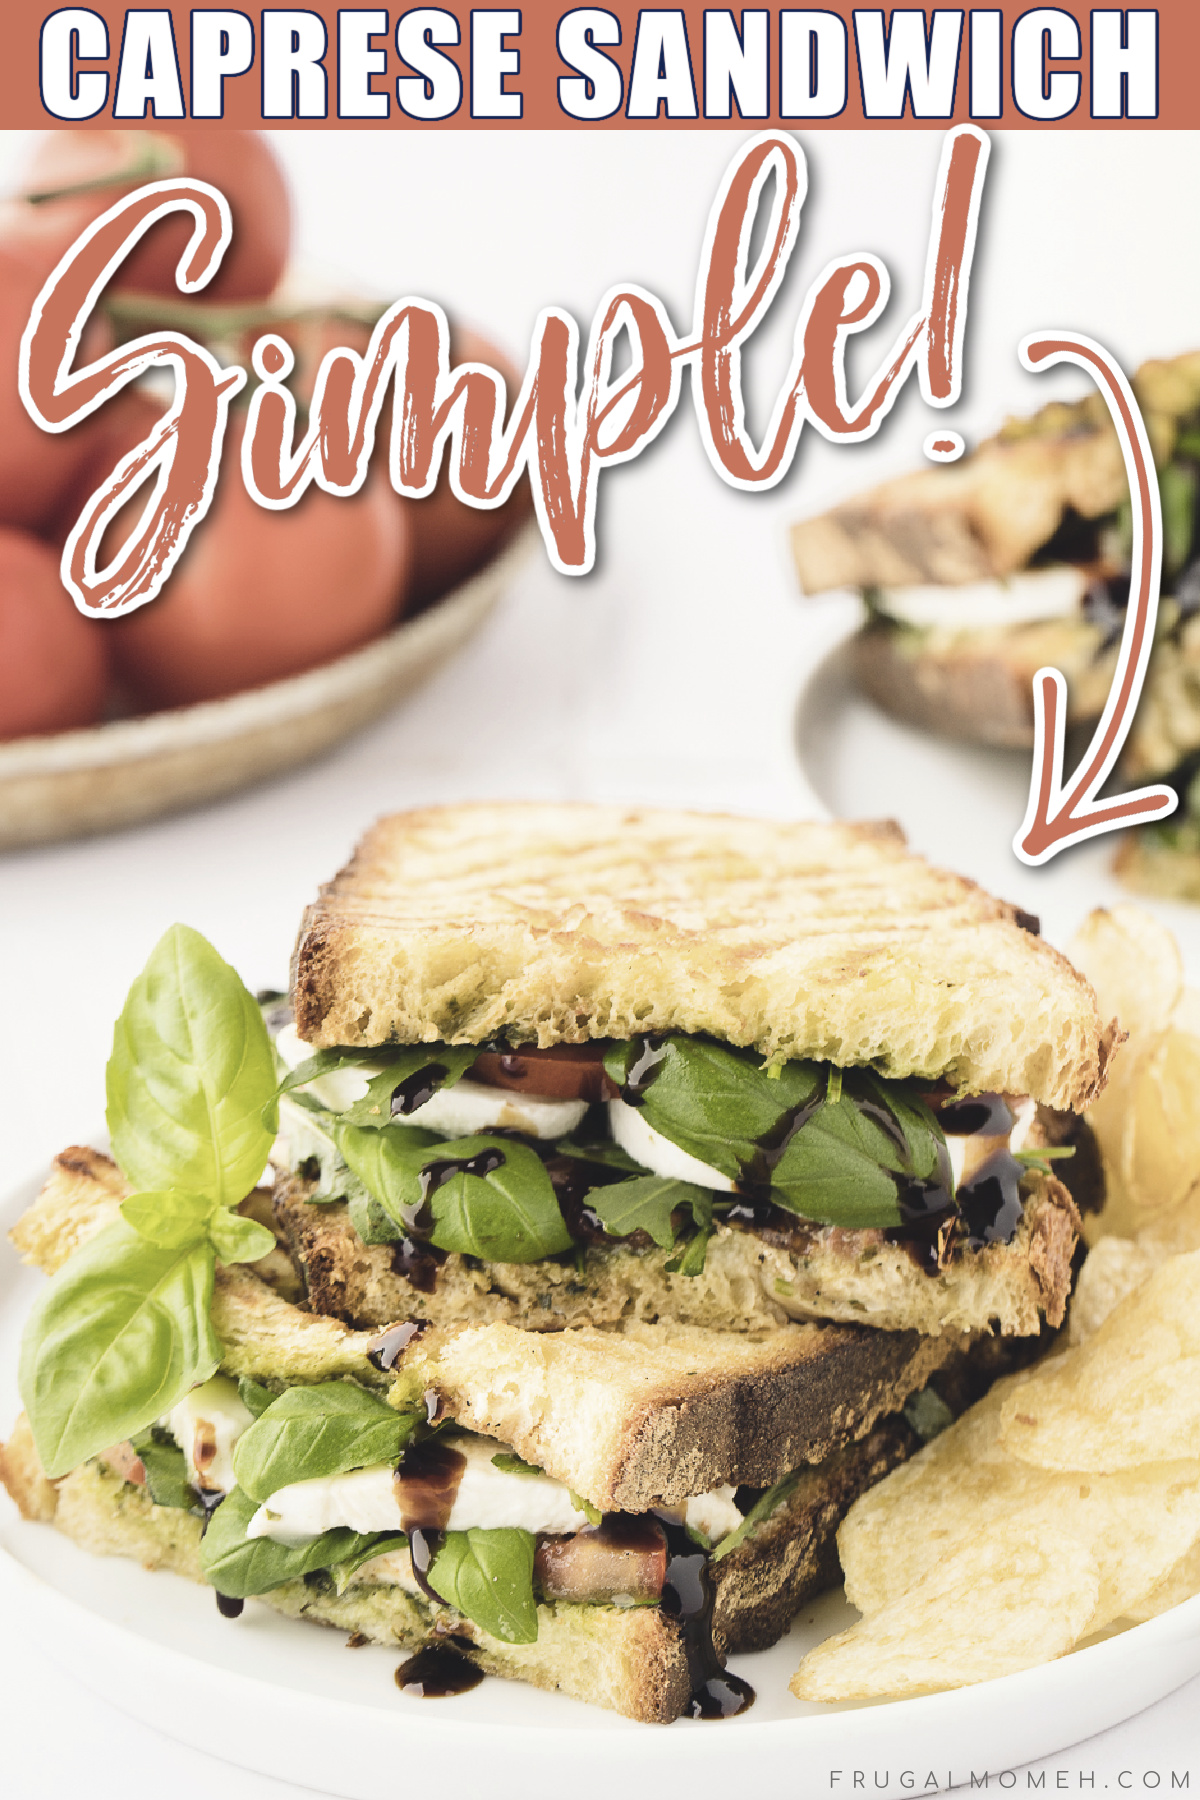 Make a delicious lunch in no time with this quick and easy caprese sandwich recipe featuring Pesto, fresh mozzarella, tomato, and basil.